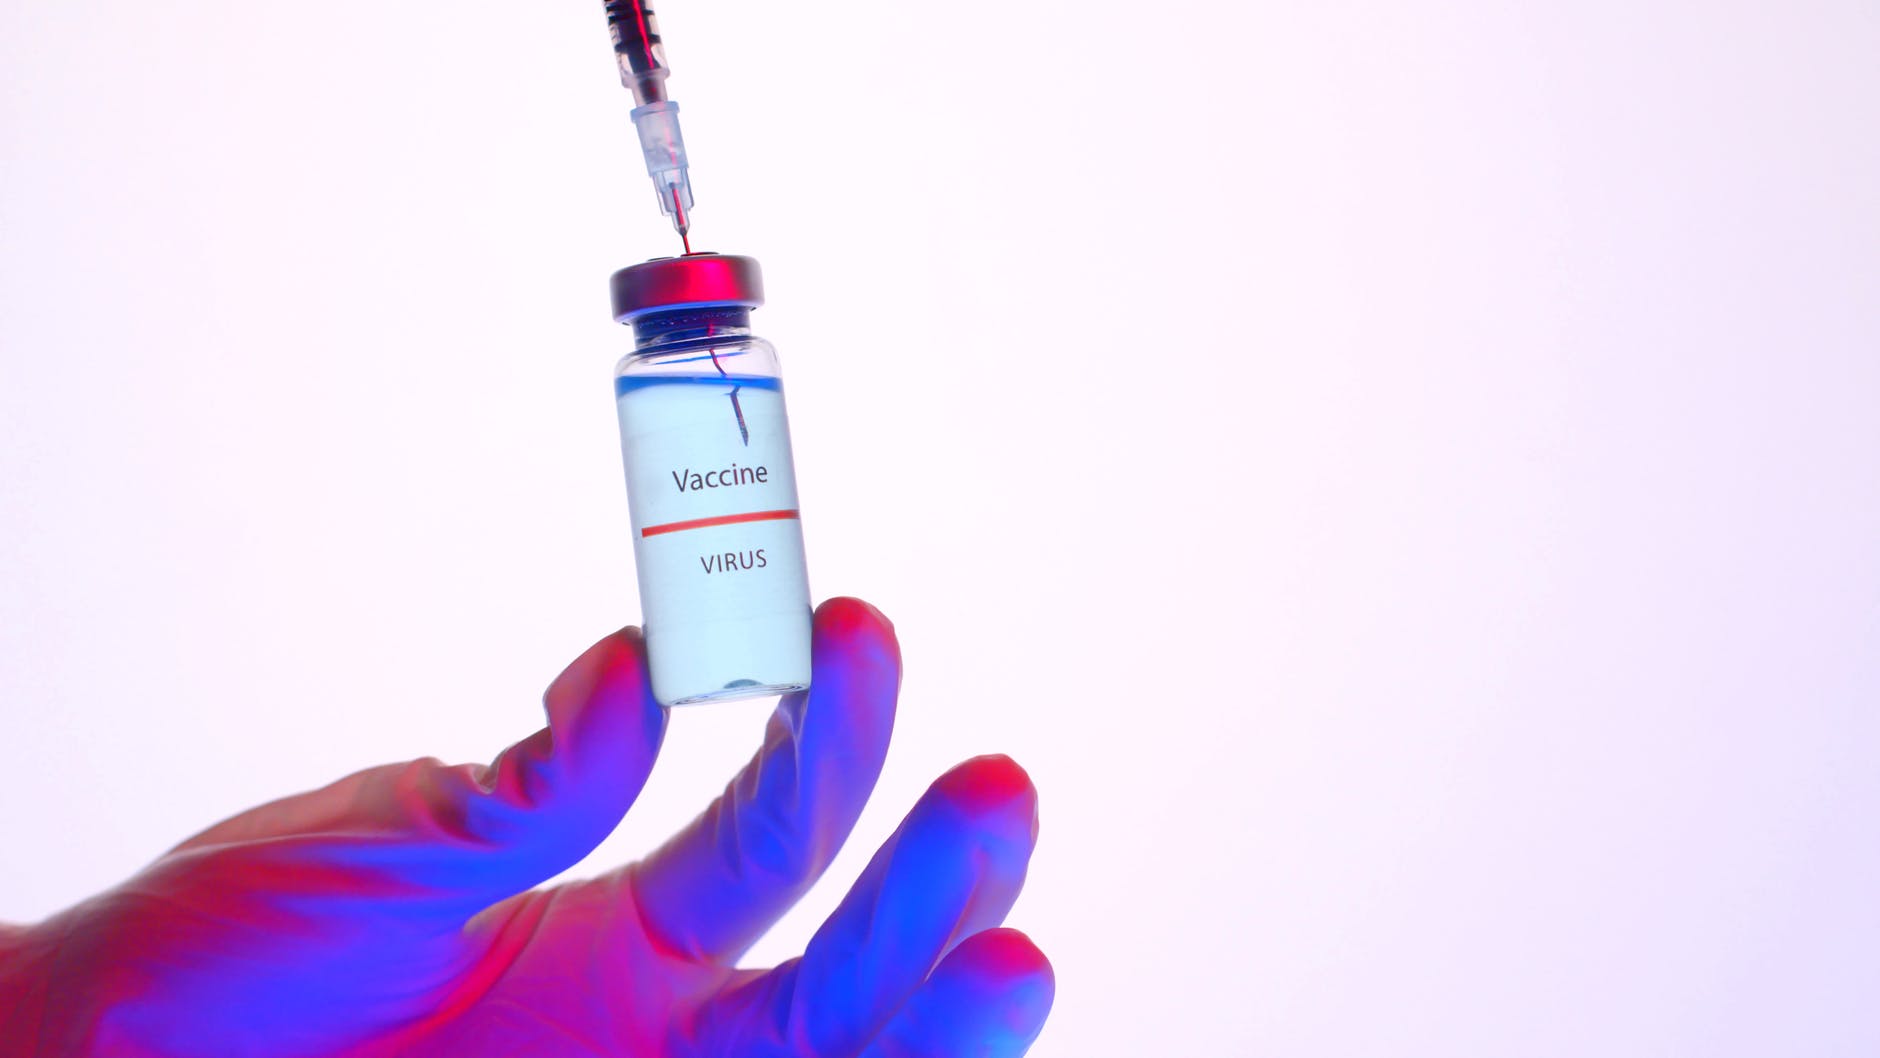 close up view of a vaccine vial